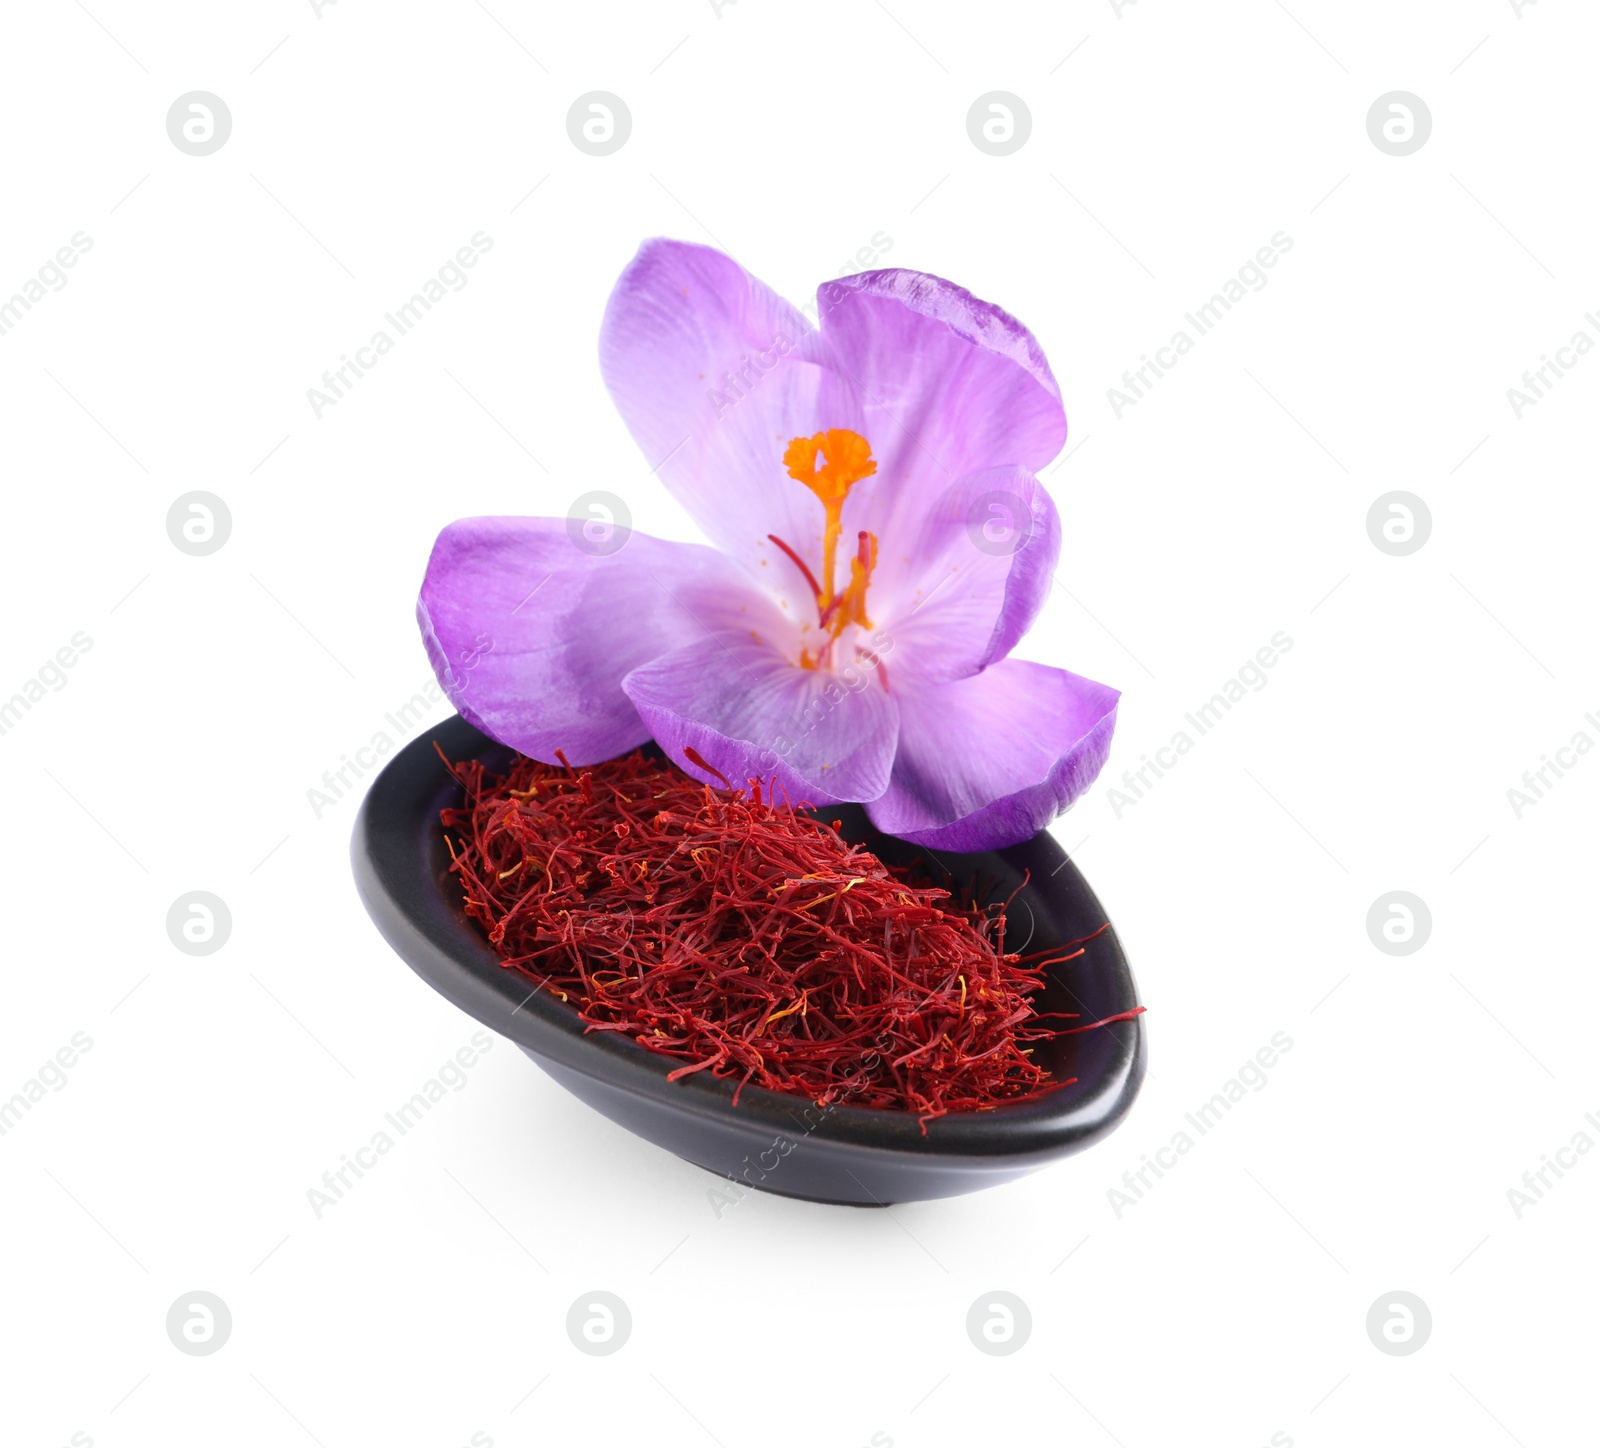 Photo of Dried saffron and crocus flower in bowl on white background